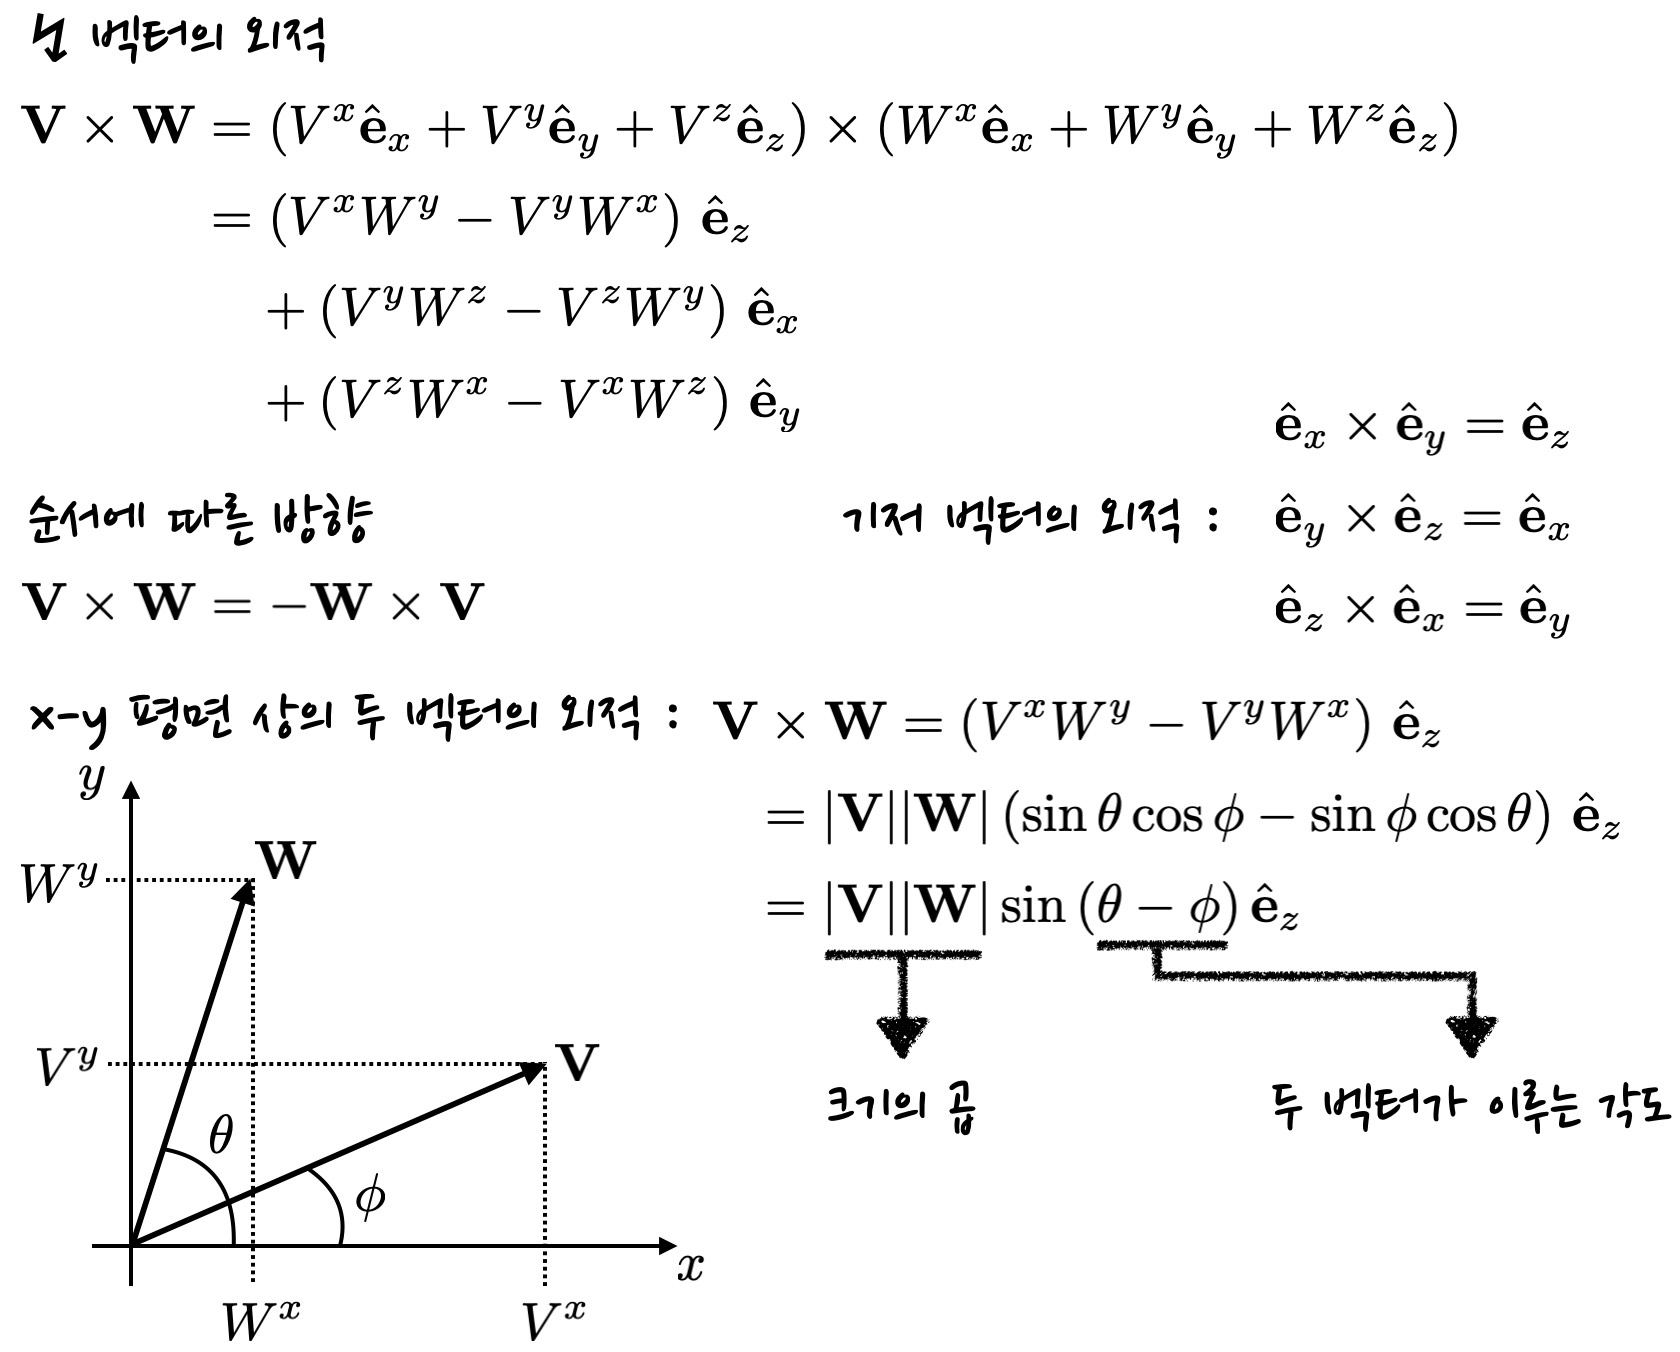 schematics of exterior product of vectors in 3-dimensional Euclidean space. It shows how to write the exterior product in terms of components of each vector. It is demonstrated that size of the exerior product is product of length of vectors and sine of the angle between two vectors.